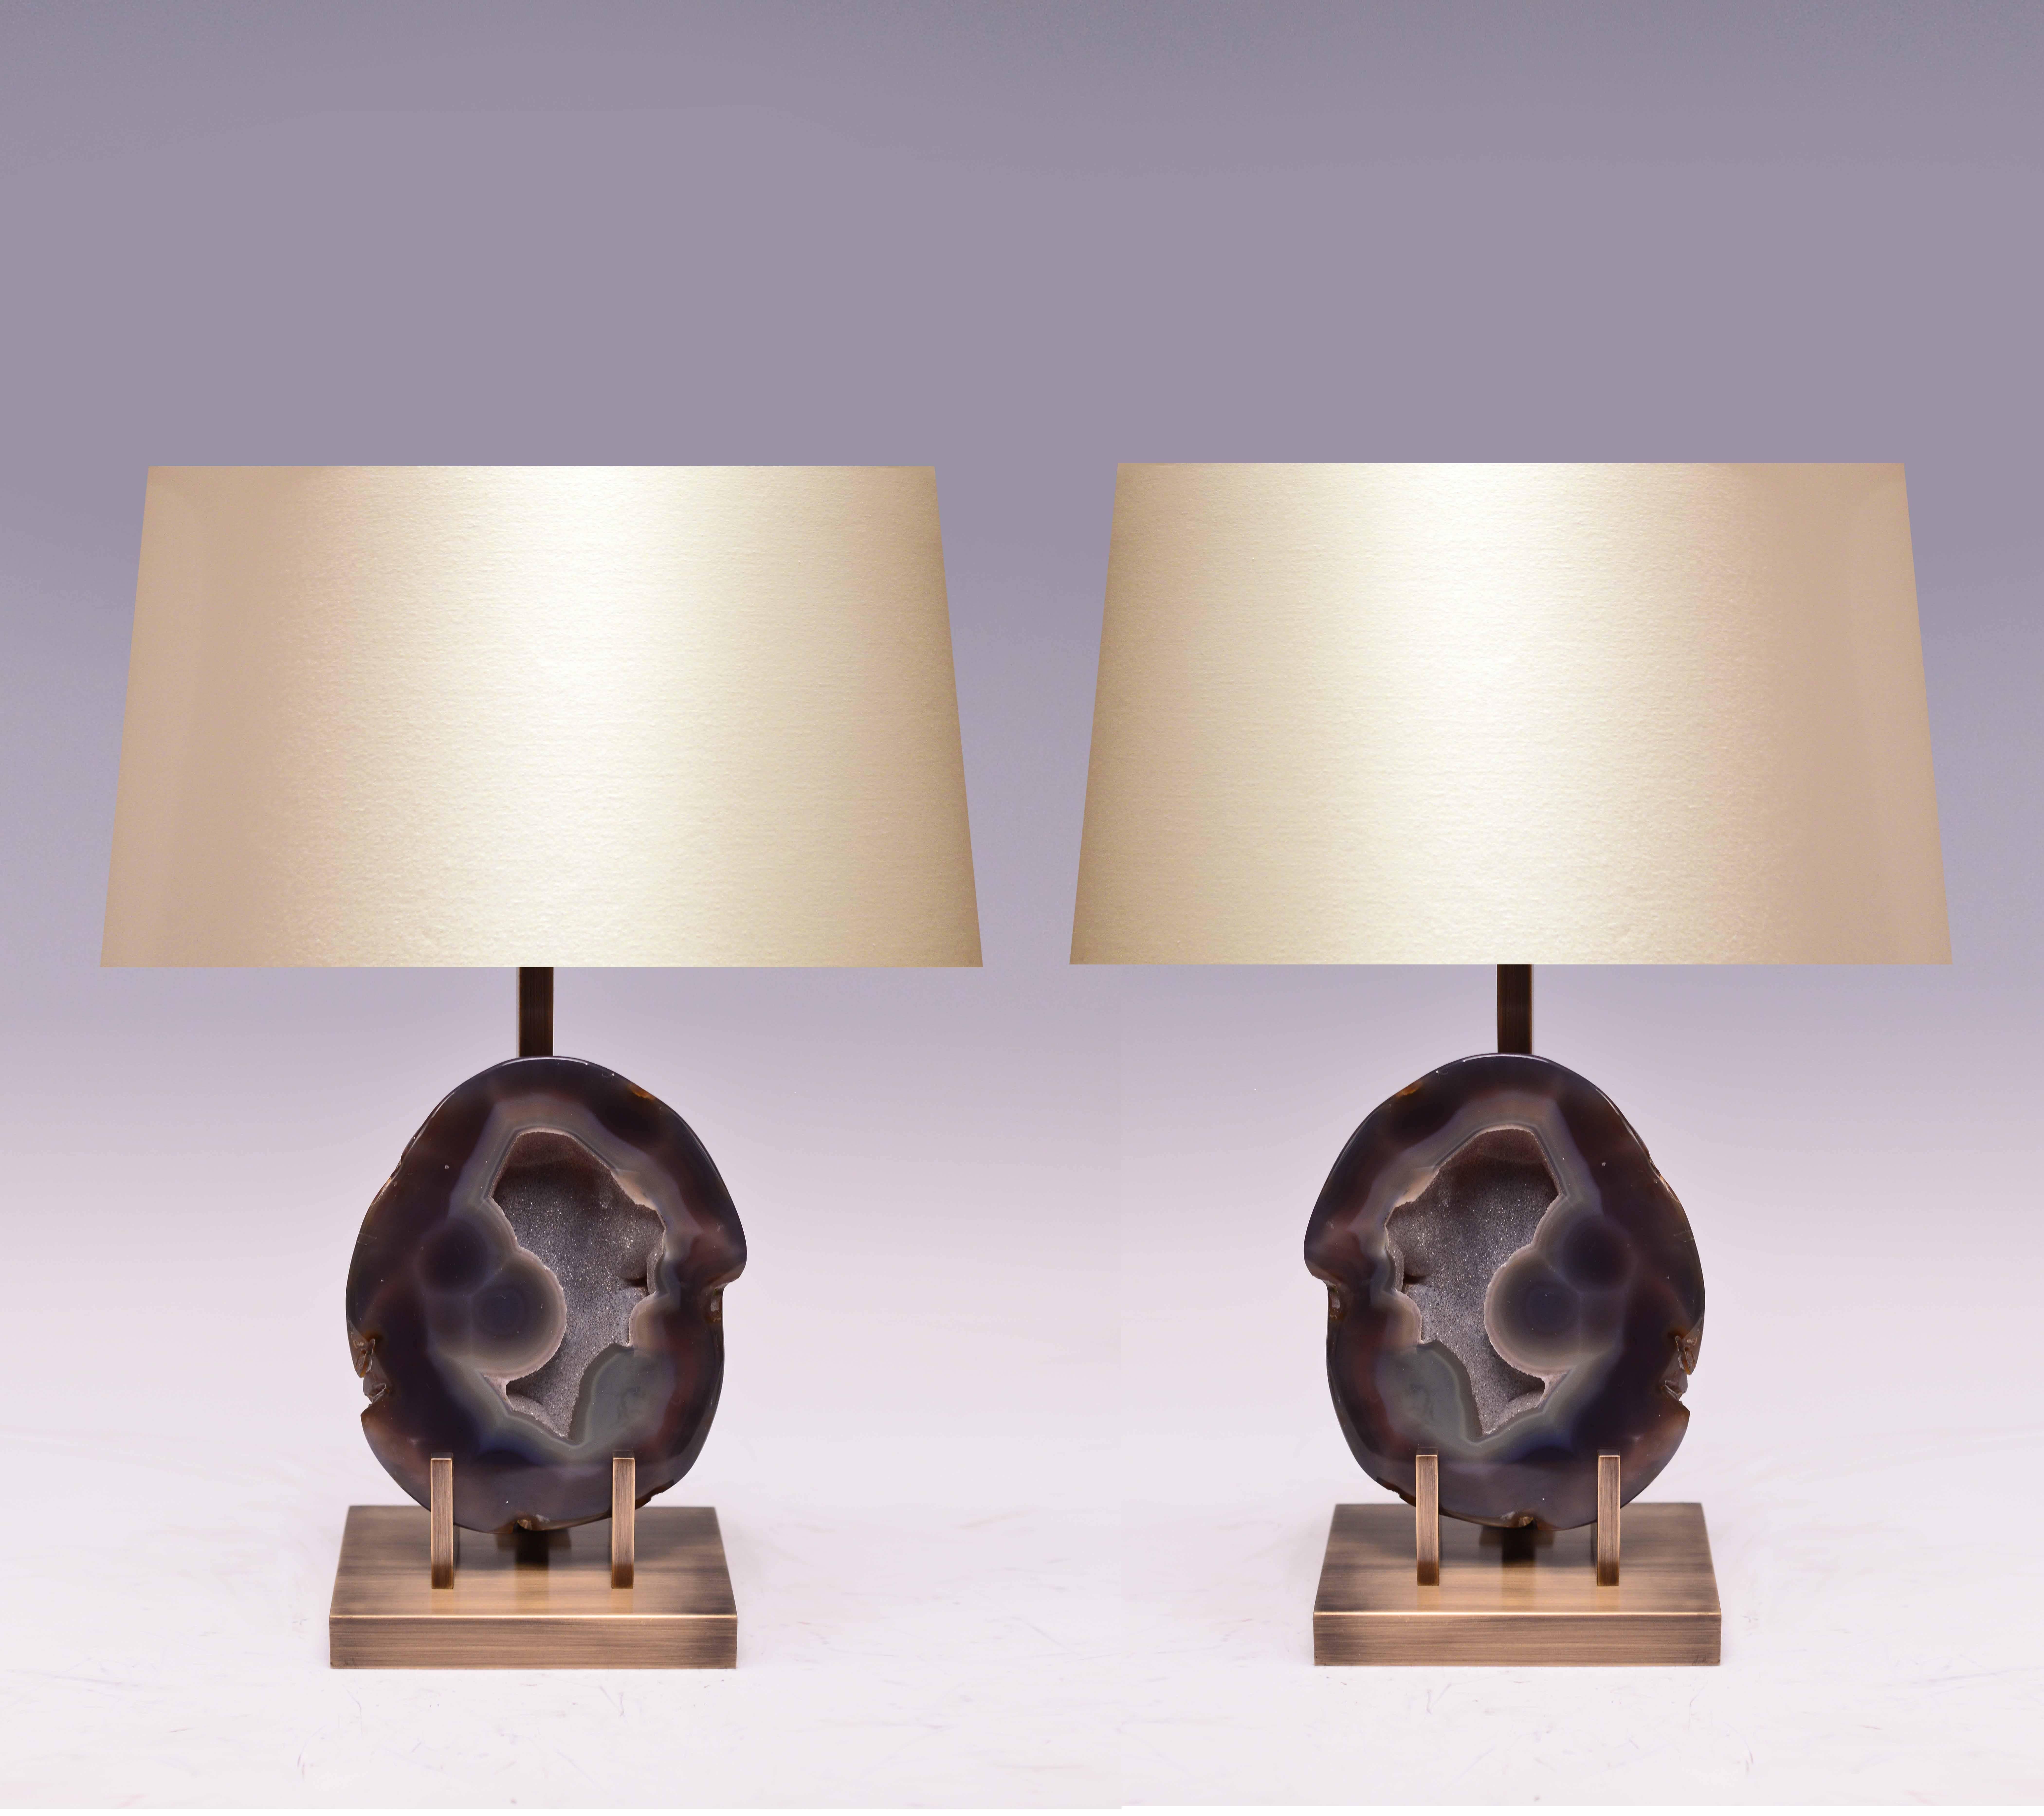 Pair of rare natural agate mount as lamps with antique brass finish stand, created by Phoenix Gallery.
(Lampshade not included)
